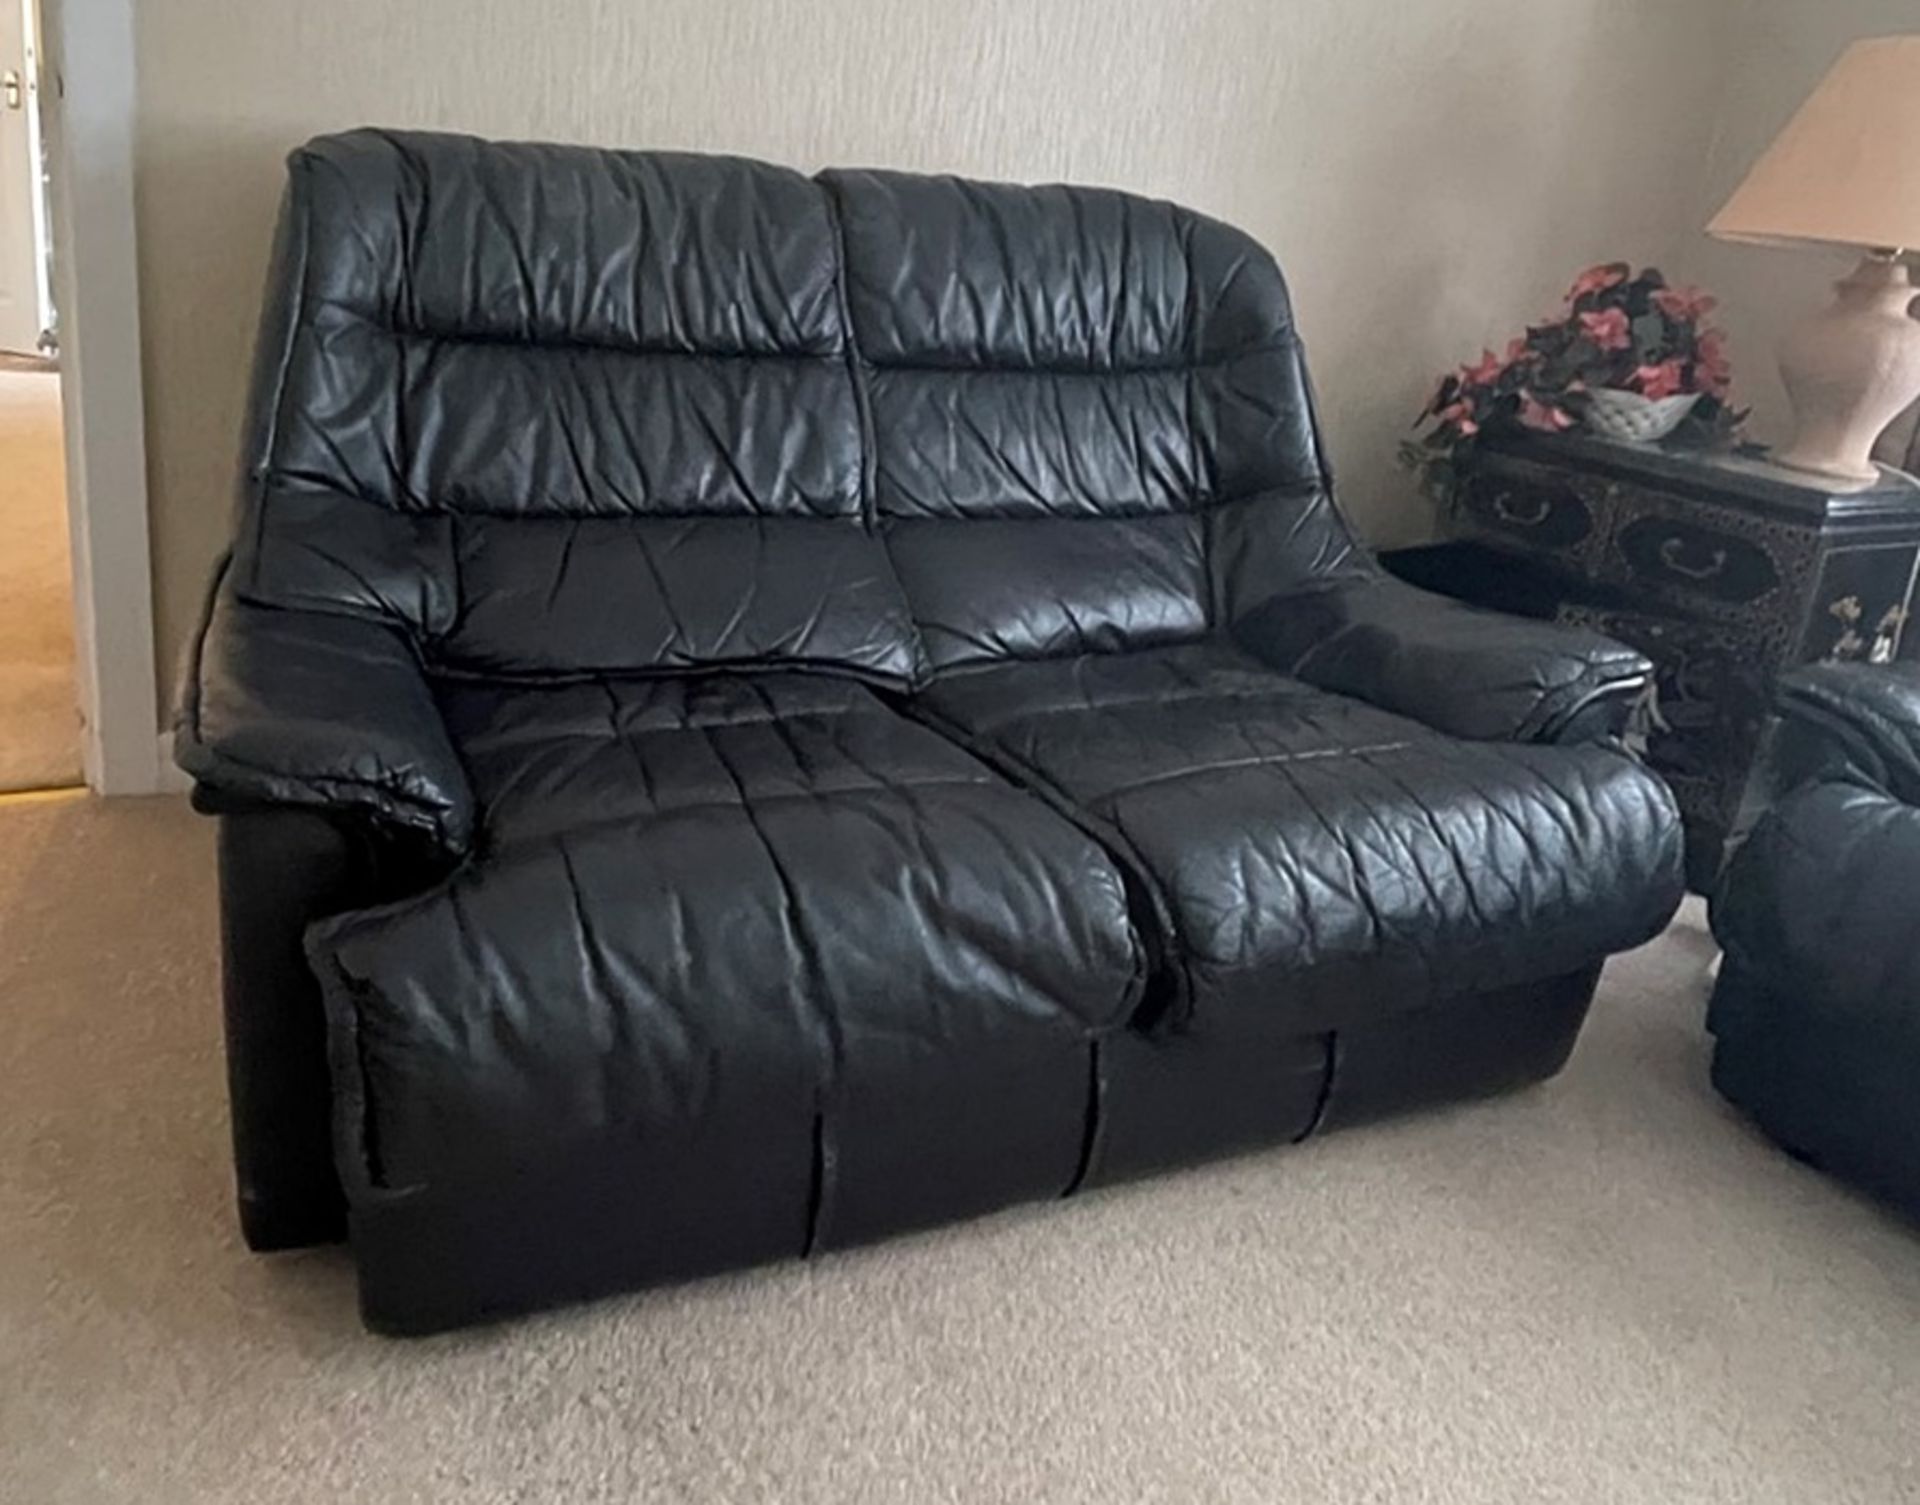 3-Piece Sofa Set In Black - Includes 1 x 3-Seater Sofa, 1 x 2-Seater Sofa & 1 x Footstool - From - Image 11 of 11